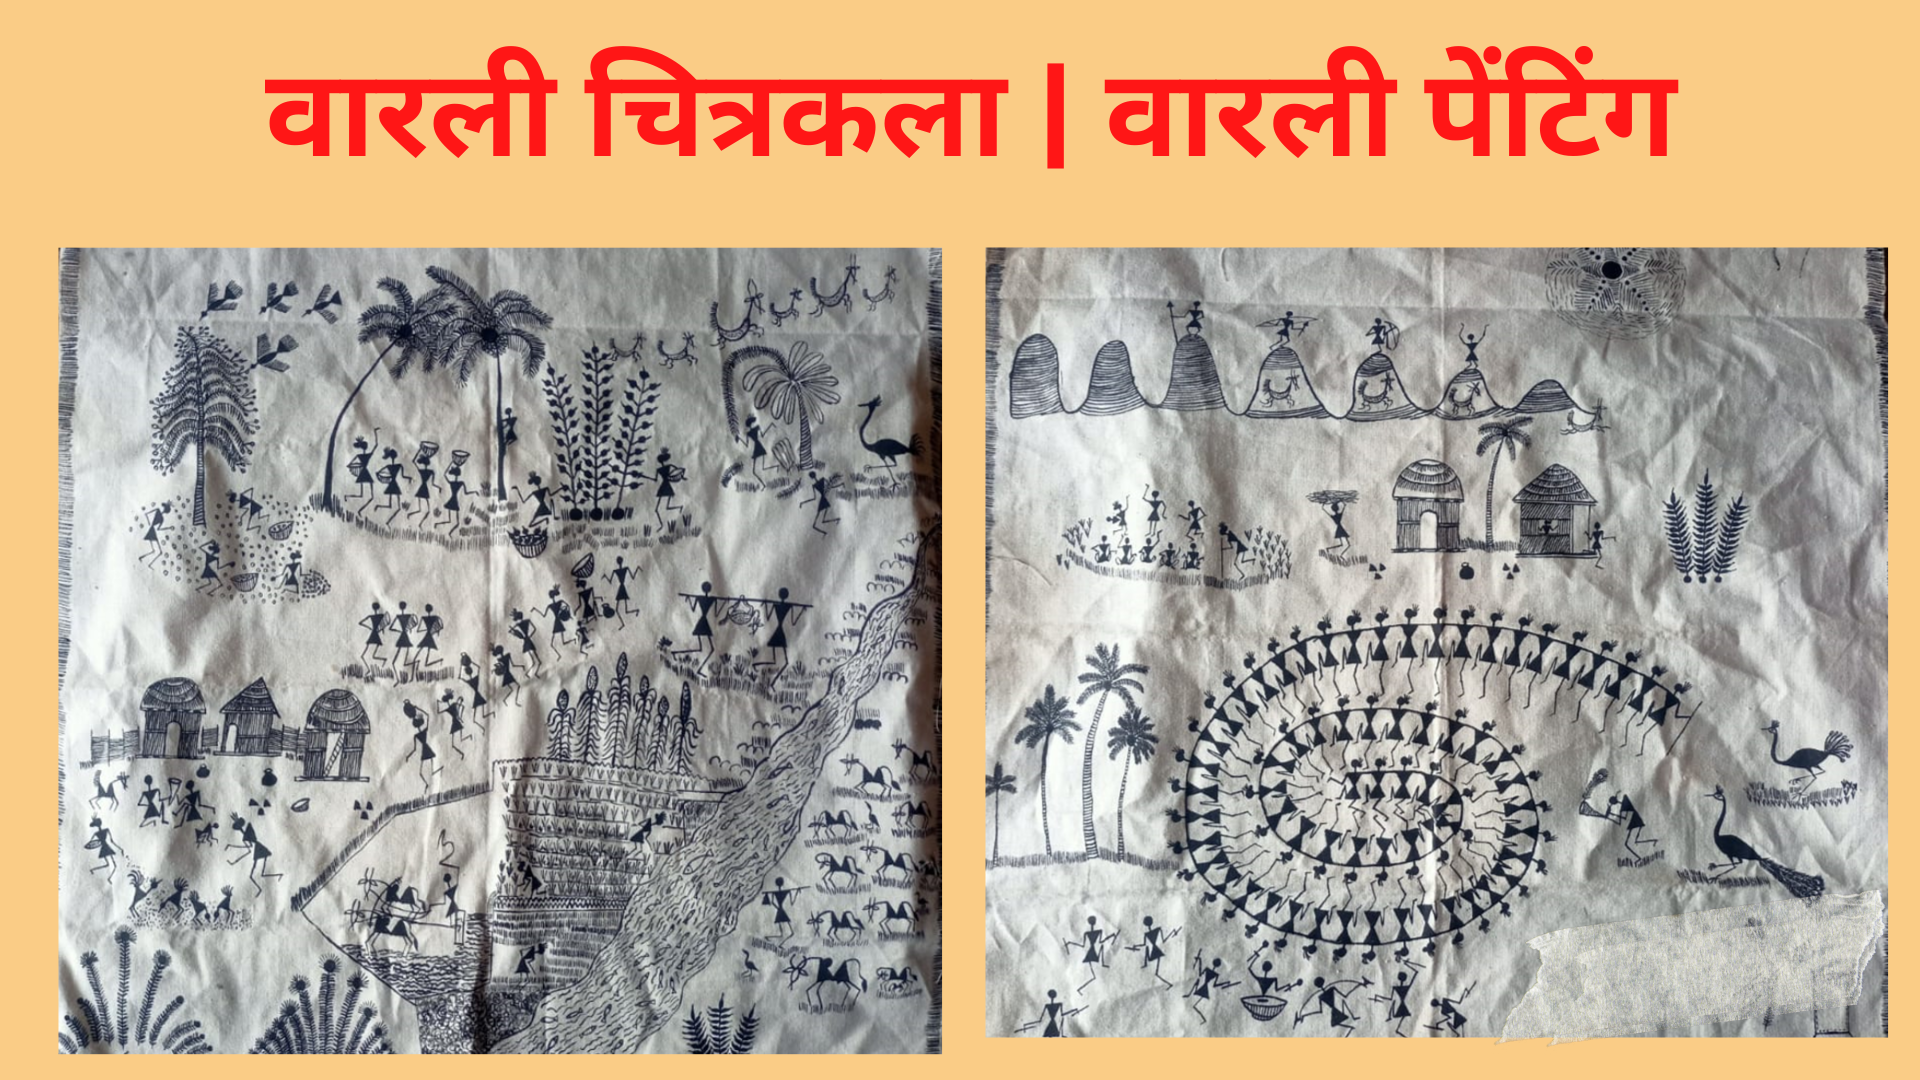 How to create a poster drawing easy | MARATHI | पोस्टर ( भित्तिचित्र )  Poster Drawing काय असते ? - ARTTEACHER.IN